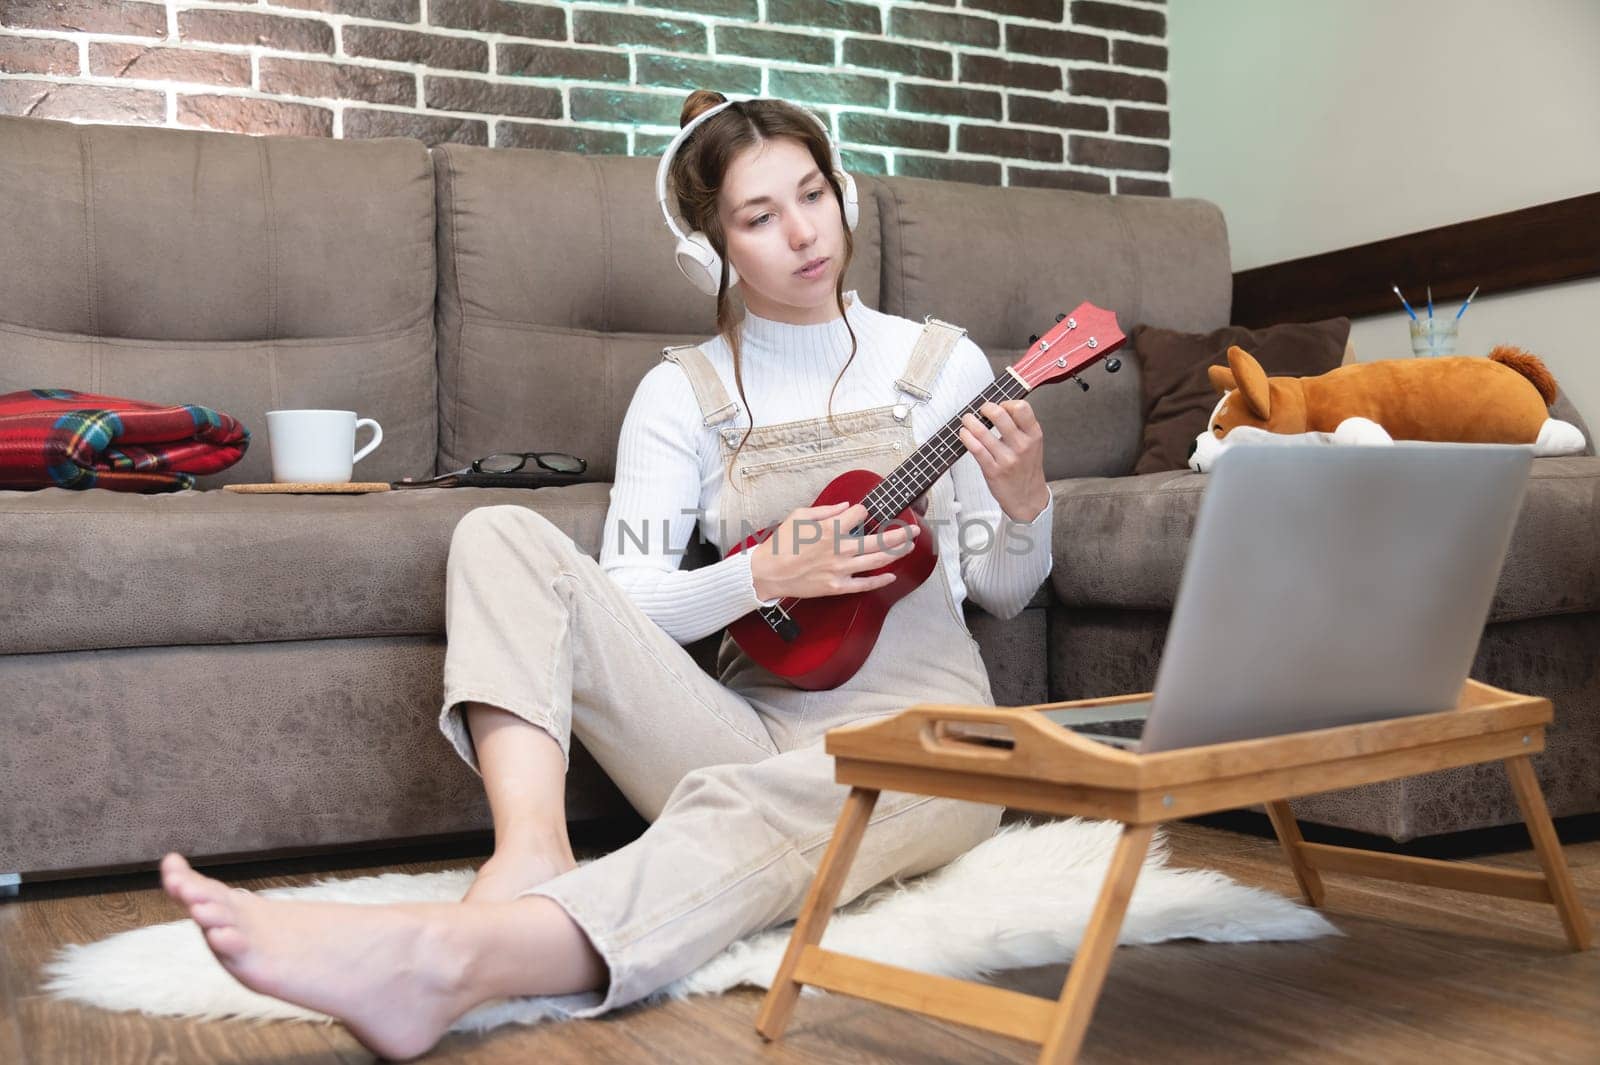 Hobbies and leisure activities during quarantine. Online training, online classes. A young woman watches a video lesson on playing the guitar, she sits on a cozy plaid with a guitar.